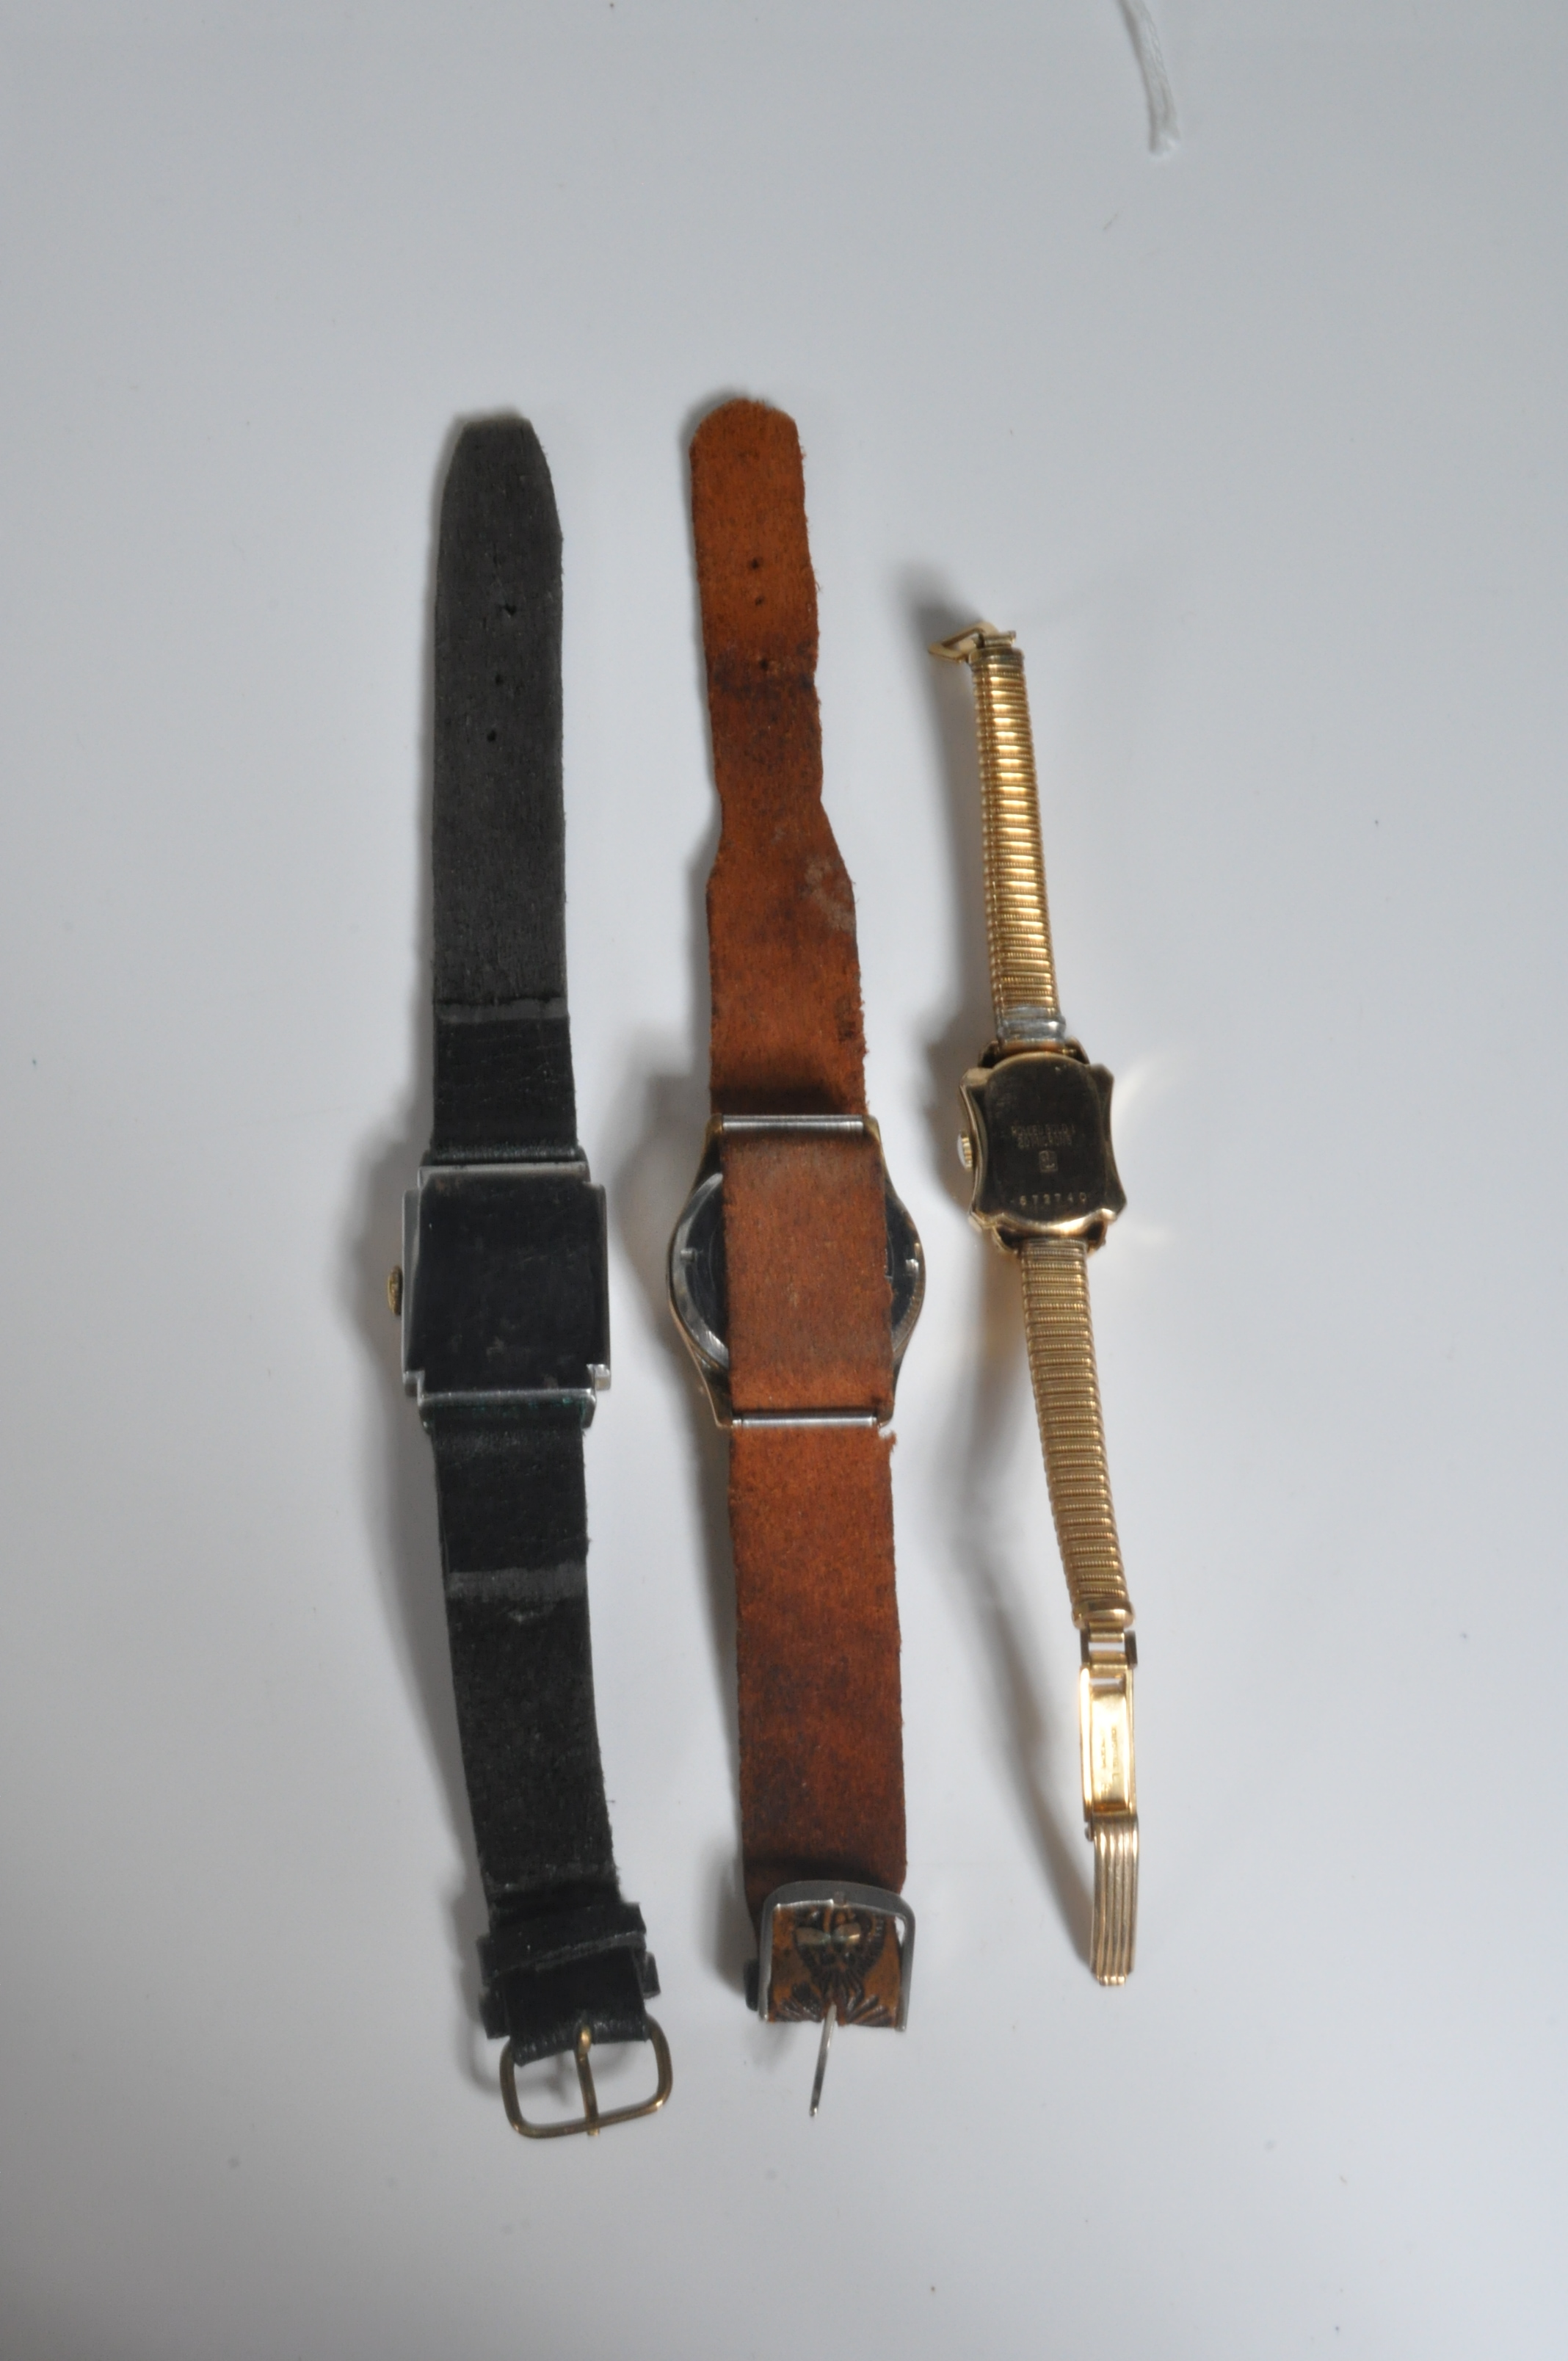 SERVICES WATCH, TANK FACED SIRO & TECHNOS WATCHES - Image 5 of 7